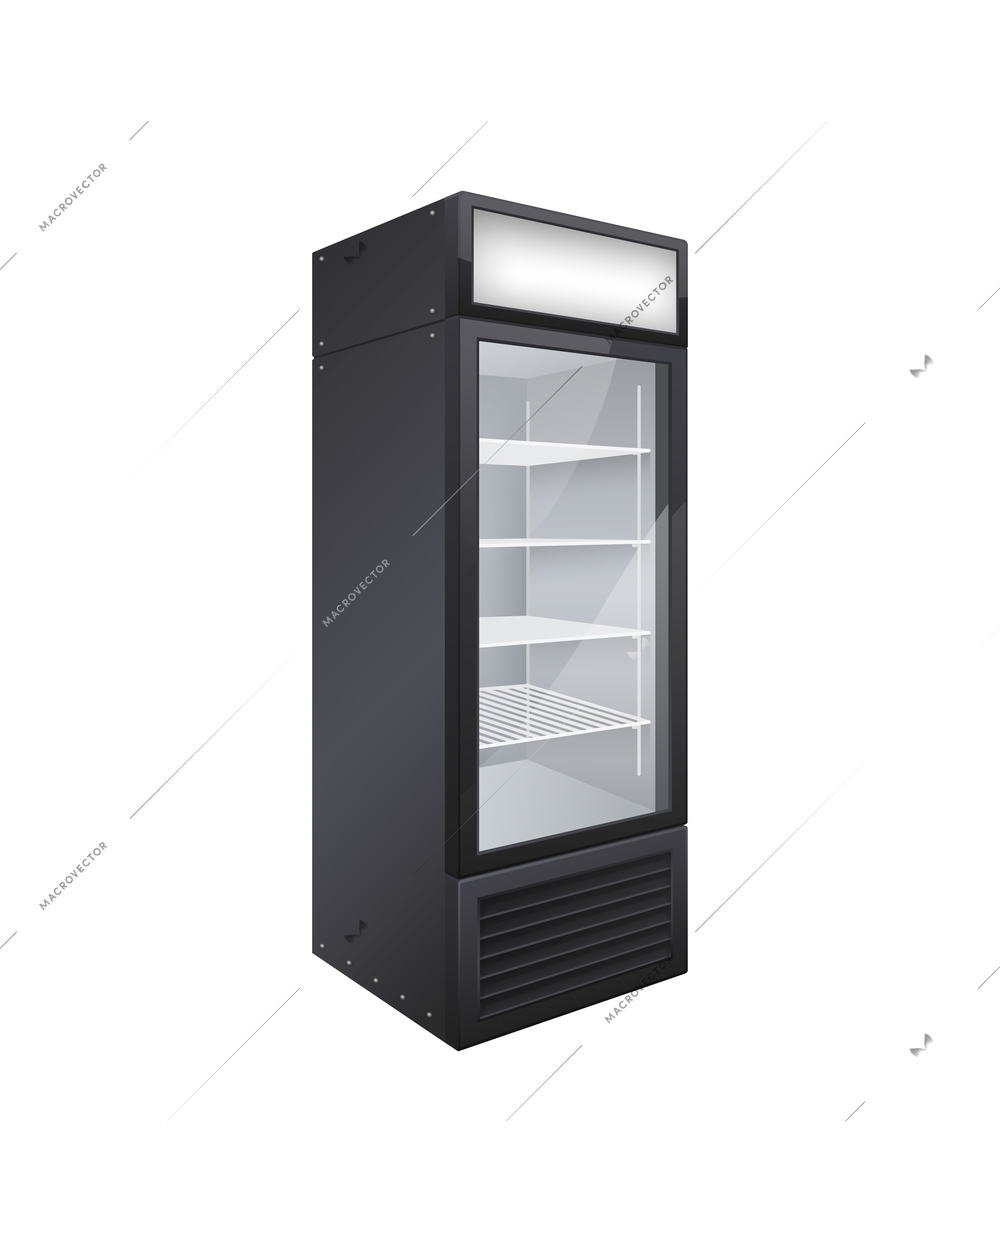 Commercial glass door drink fridge realistic composition with isolated image of shop fridge vector illustration